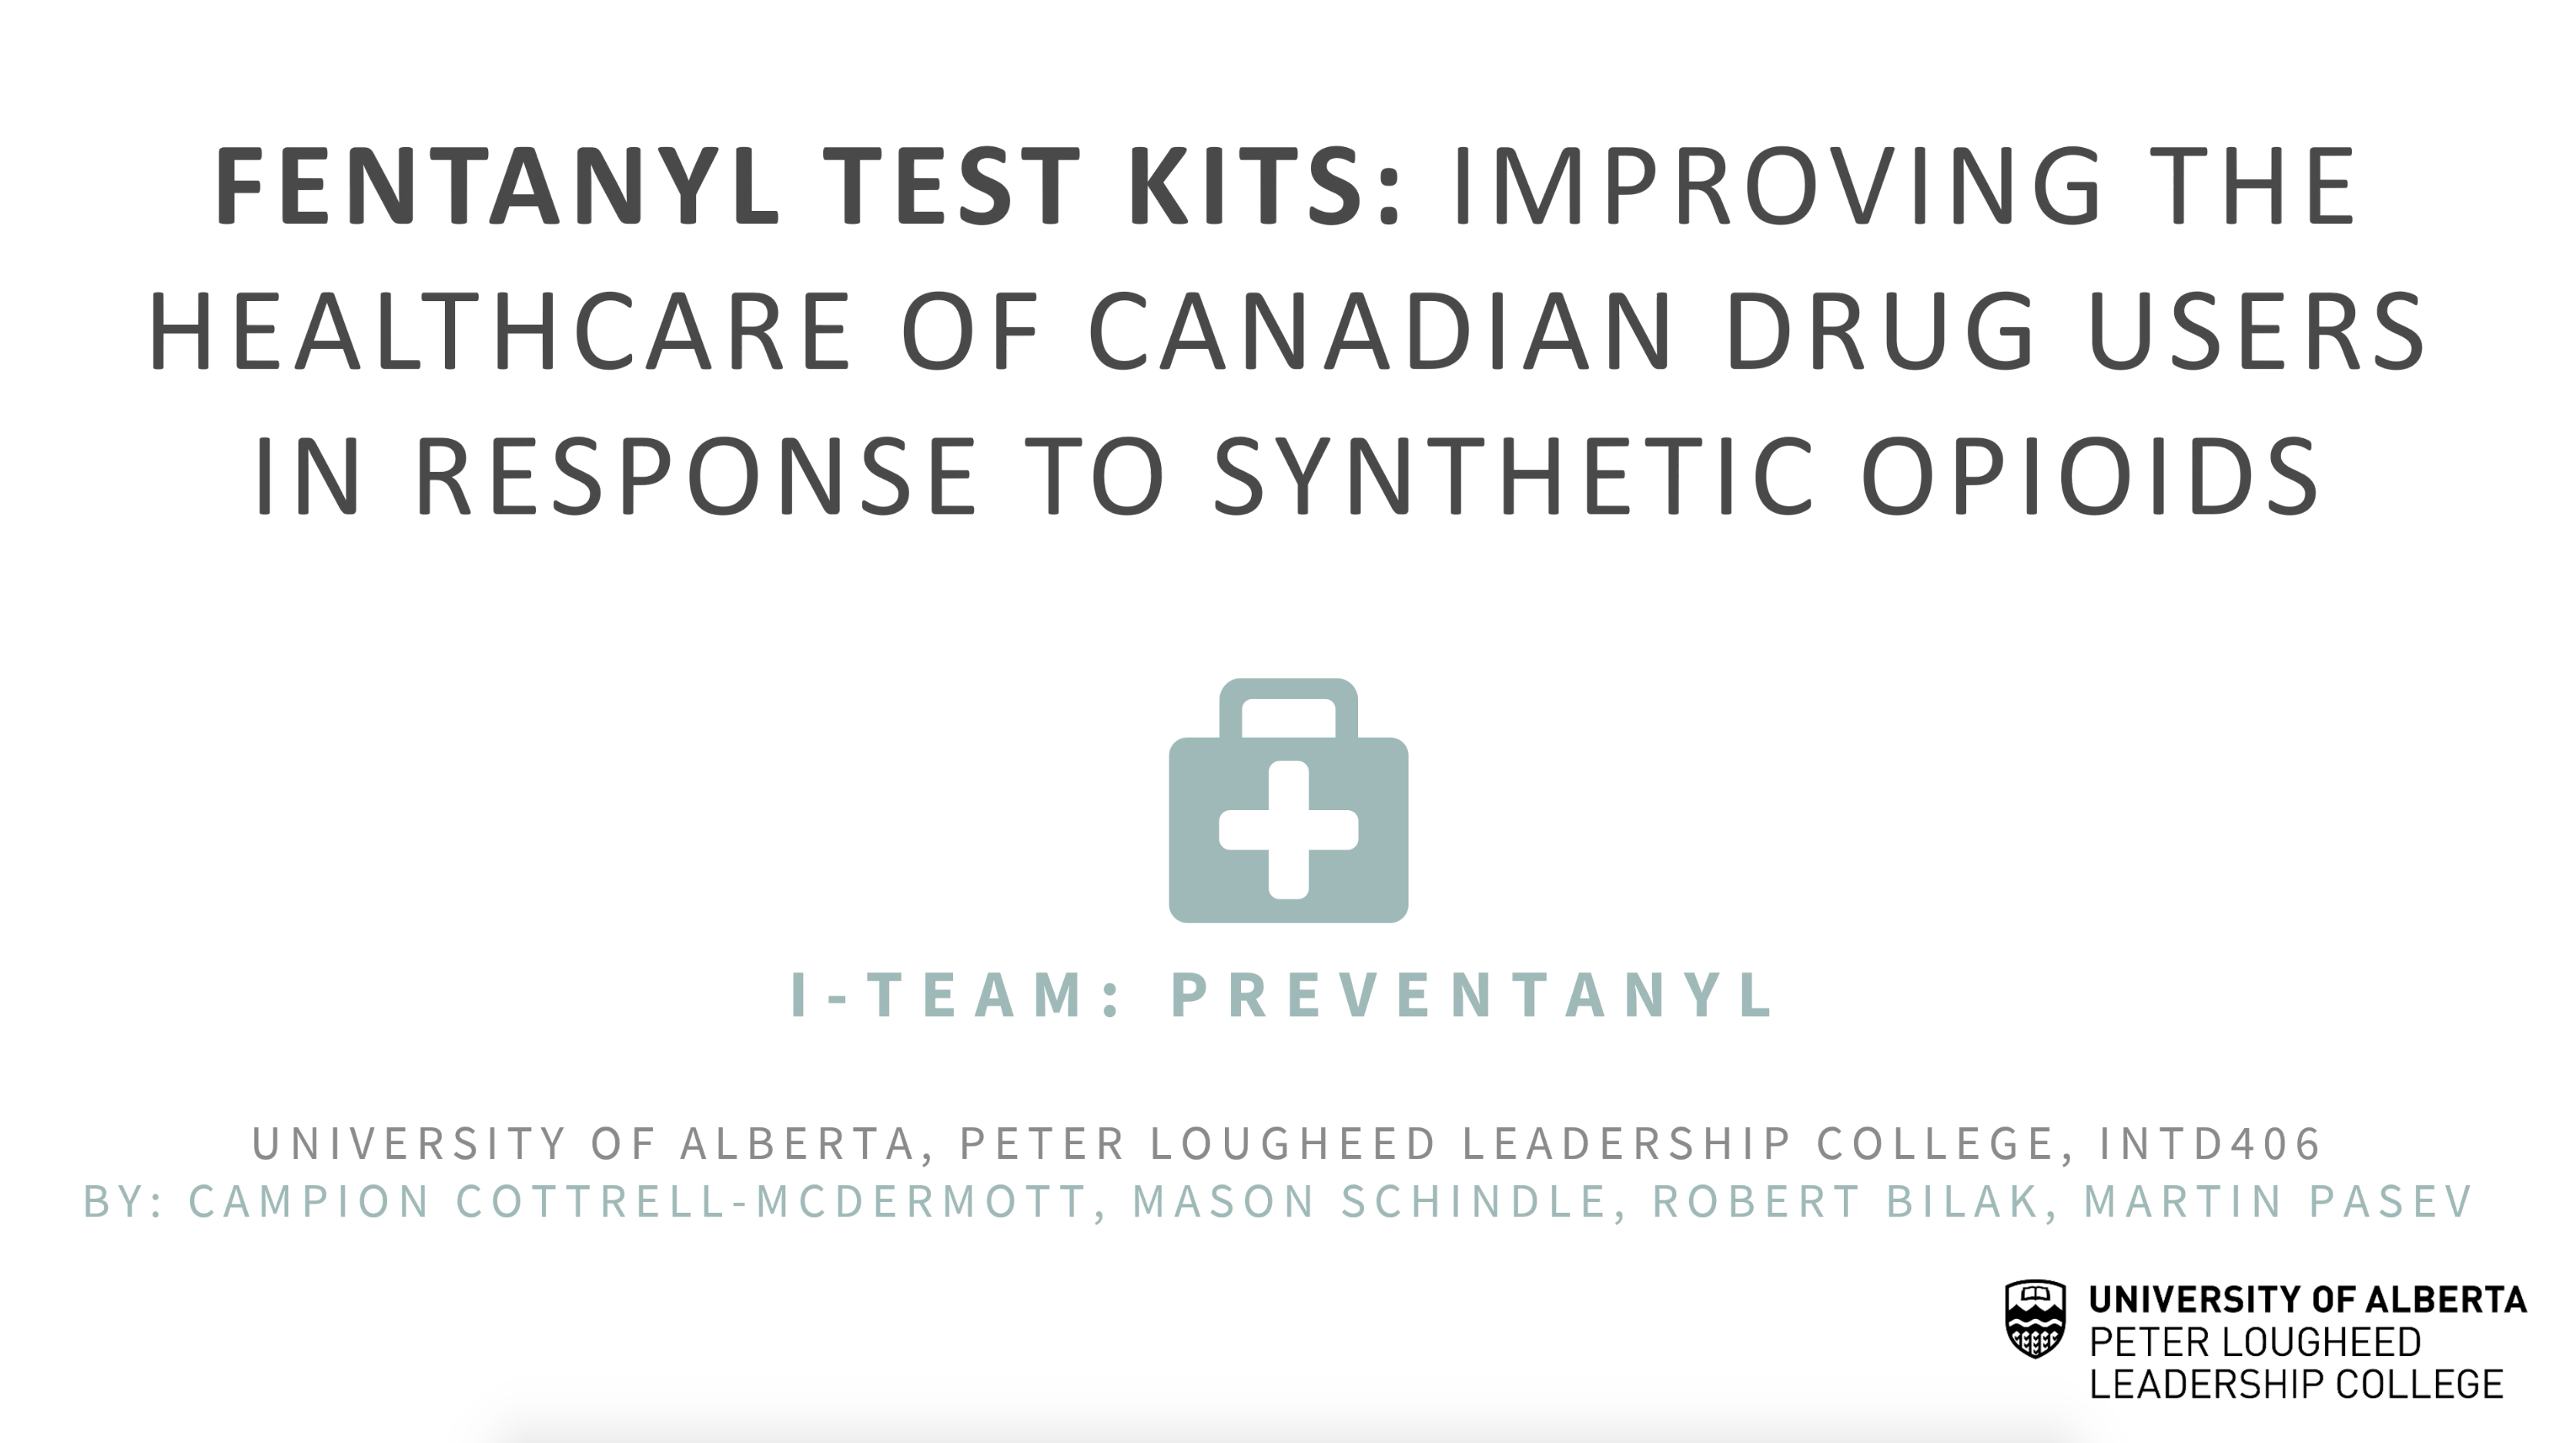 title page image reads fentanyl test kits: improving the healthcare of canadian drug users in response to synthetic opiods by i-team Preventanyl including campion, mason, robert and martin in the INT D 406 class